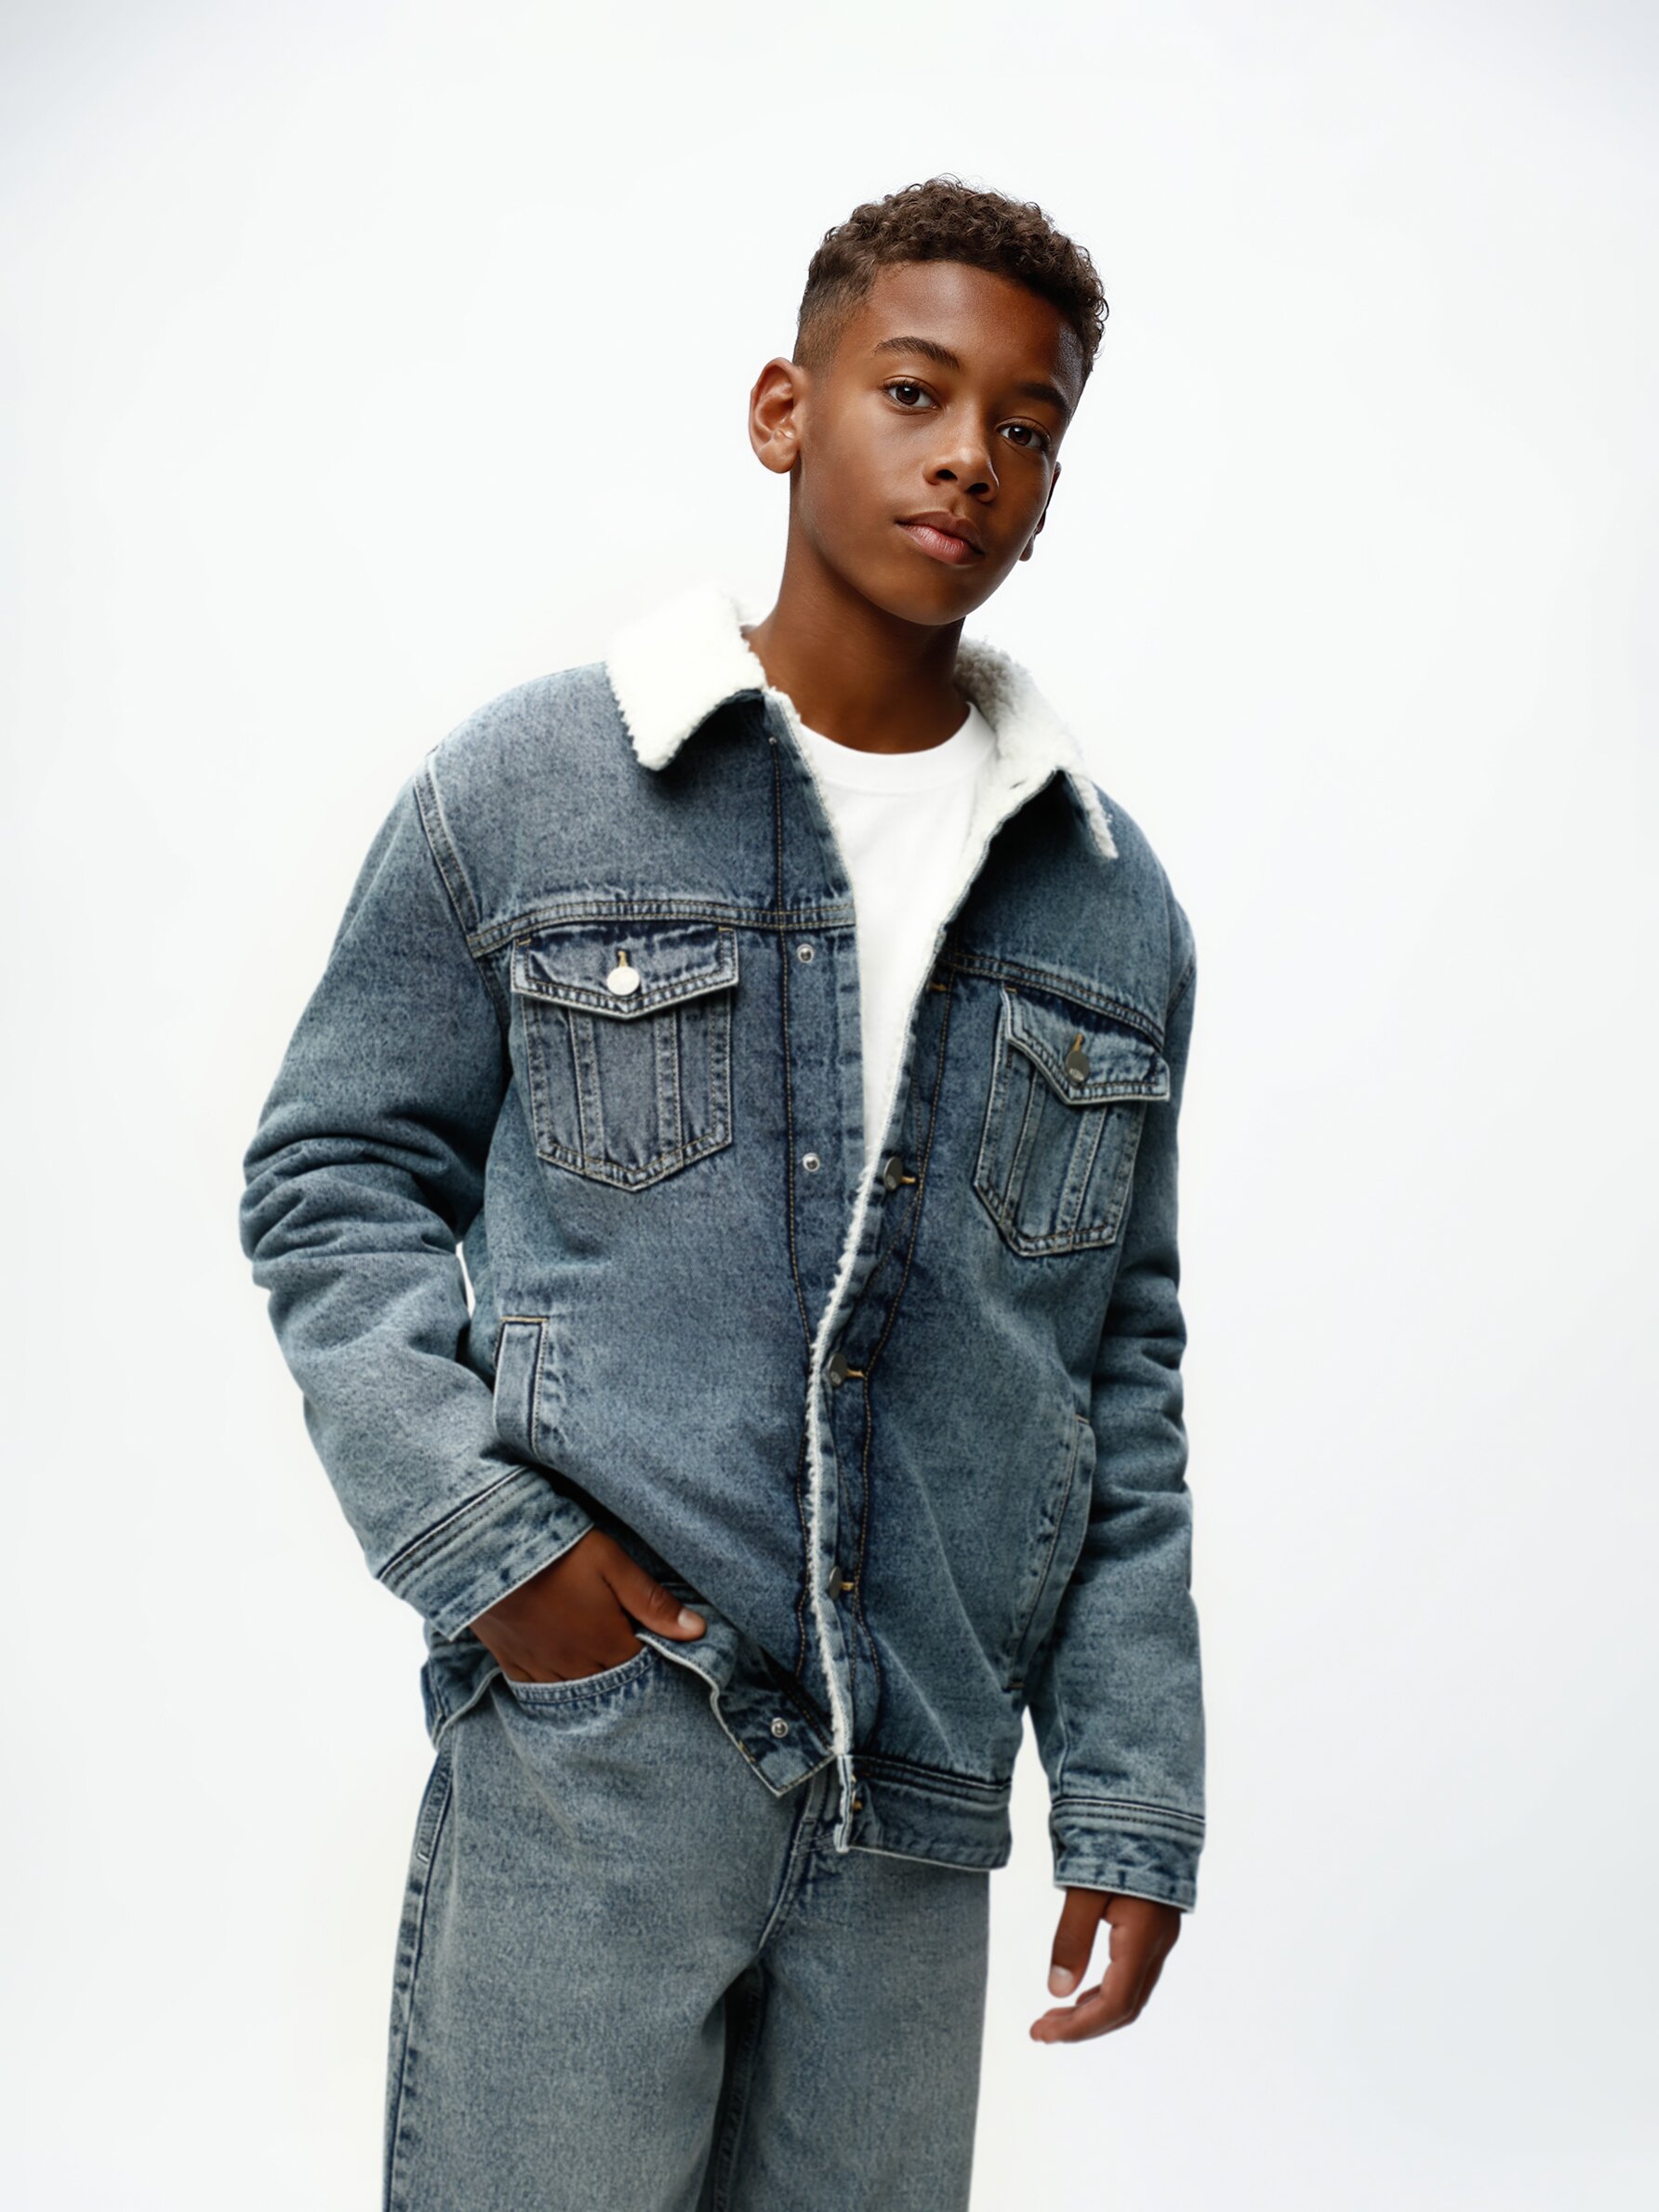 Buy Sherpa Lined Hooded Denim Jacket Men's Outerwear from Brooklyn Cloth.  Find Brooklyn Cloth fashion & more at DrJays.com